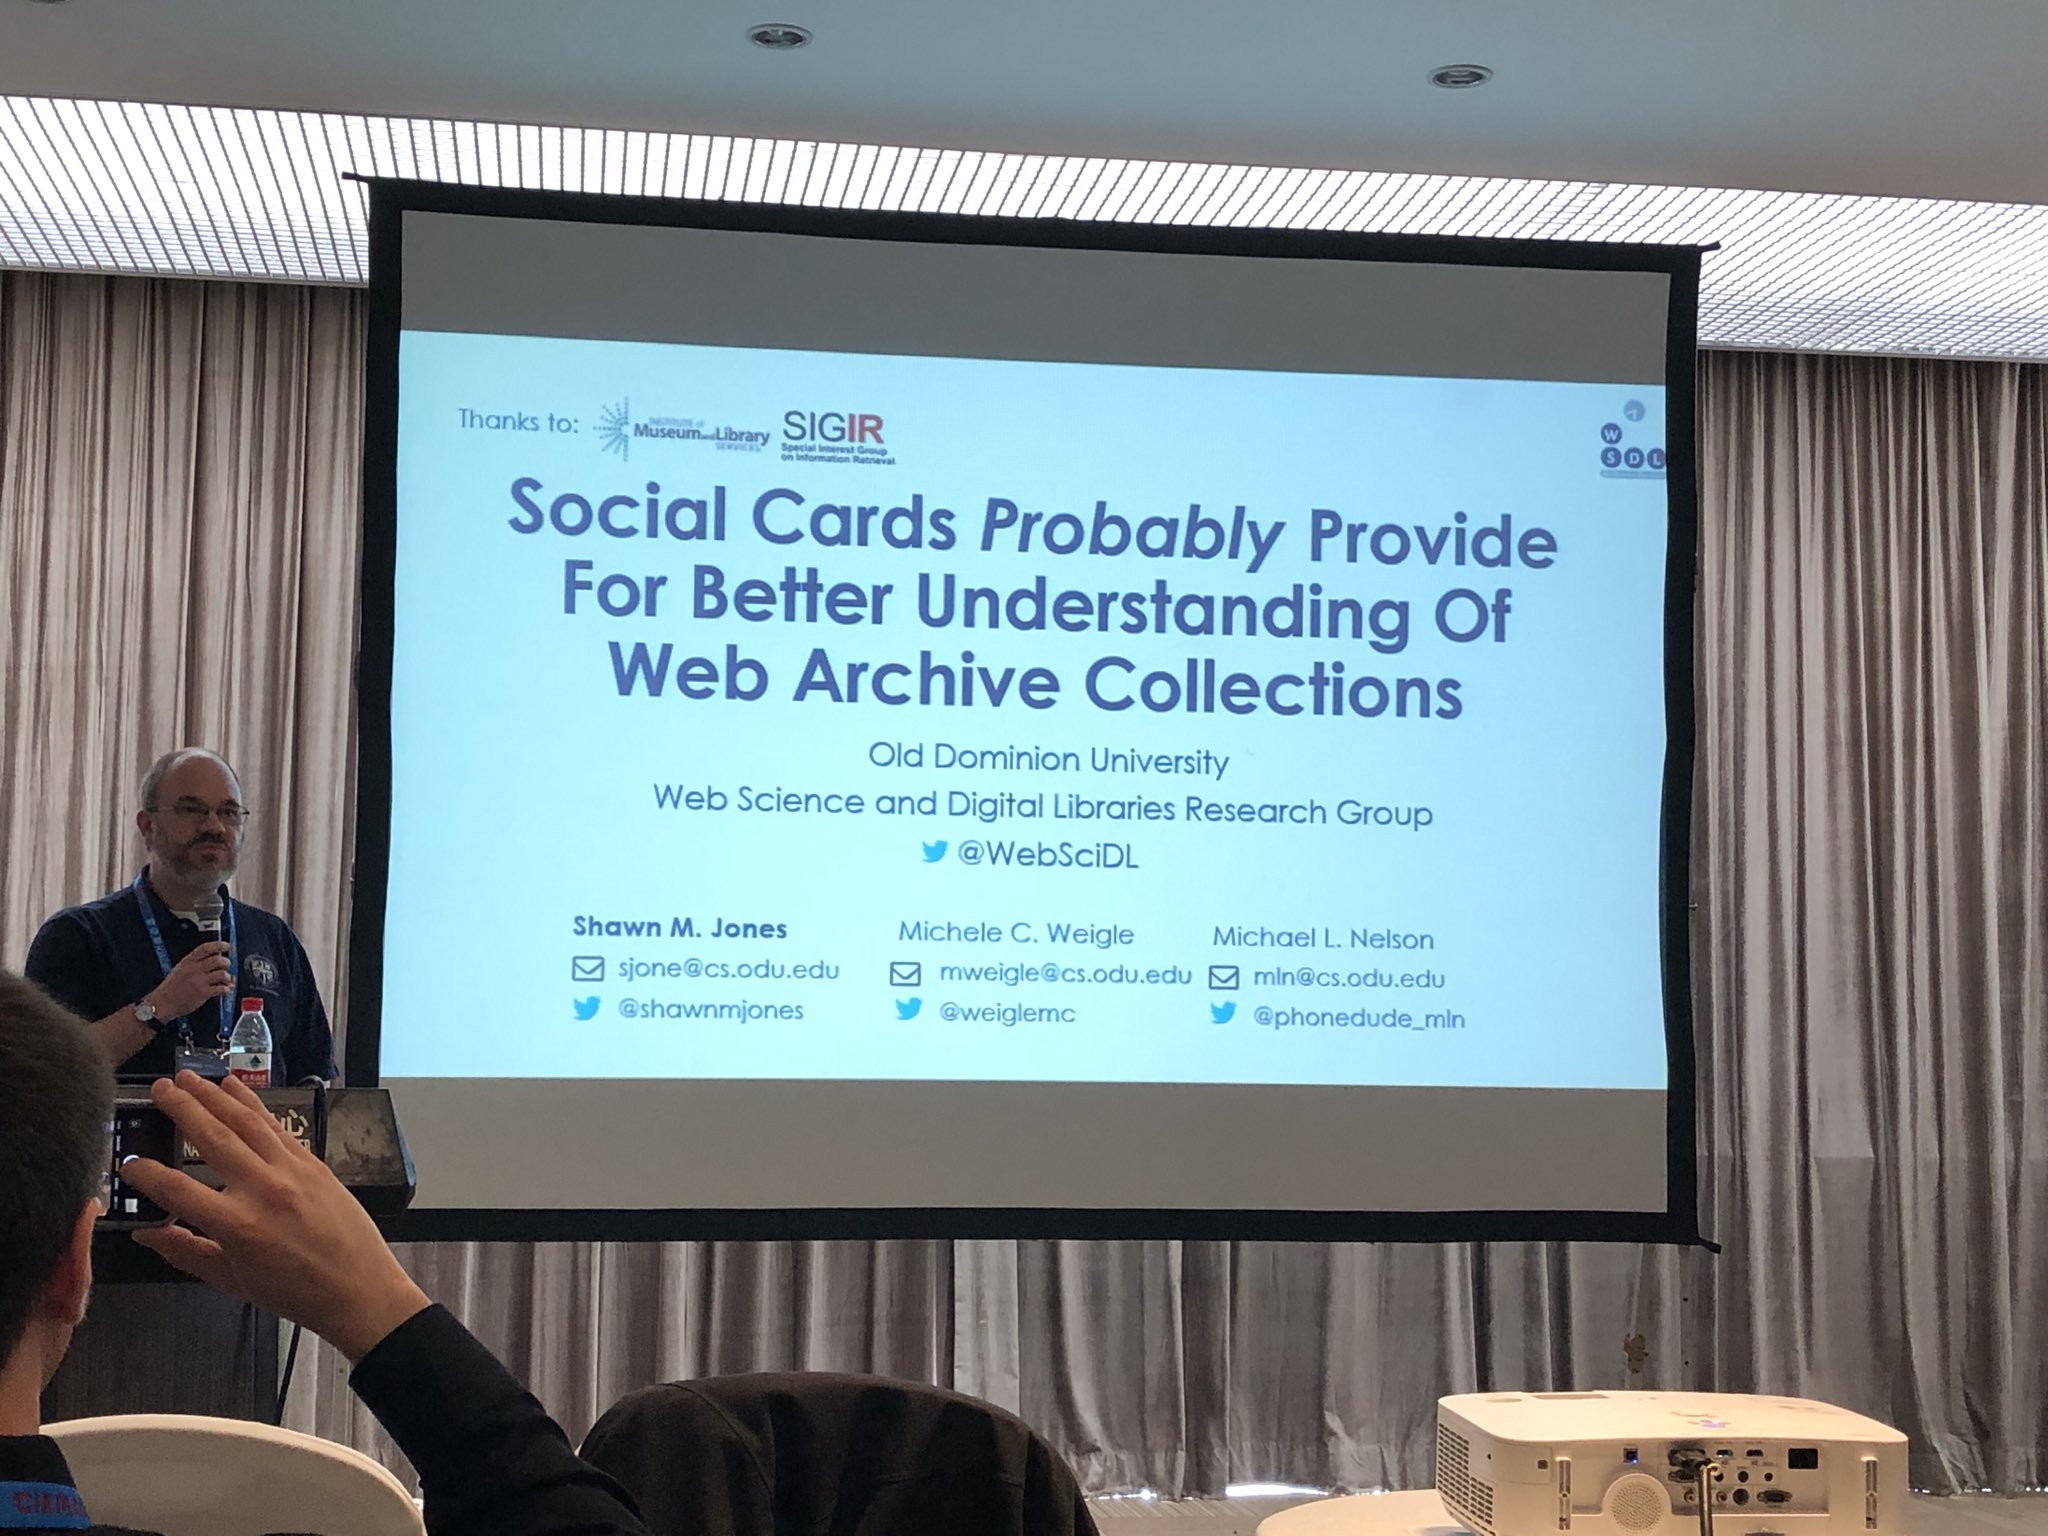 Social Cards Probably Provide For Better Understanding Of Web Archive Collections